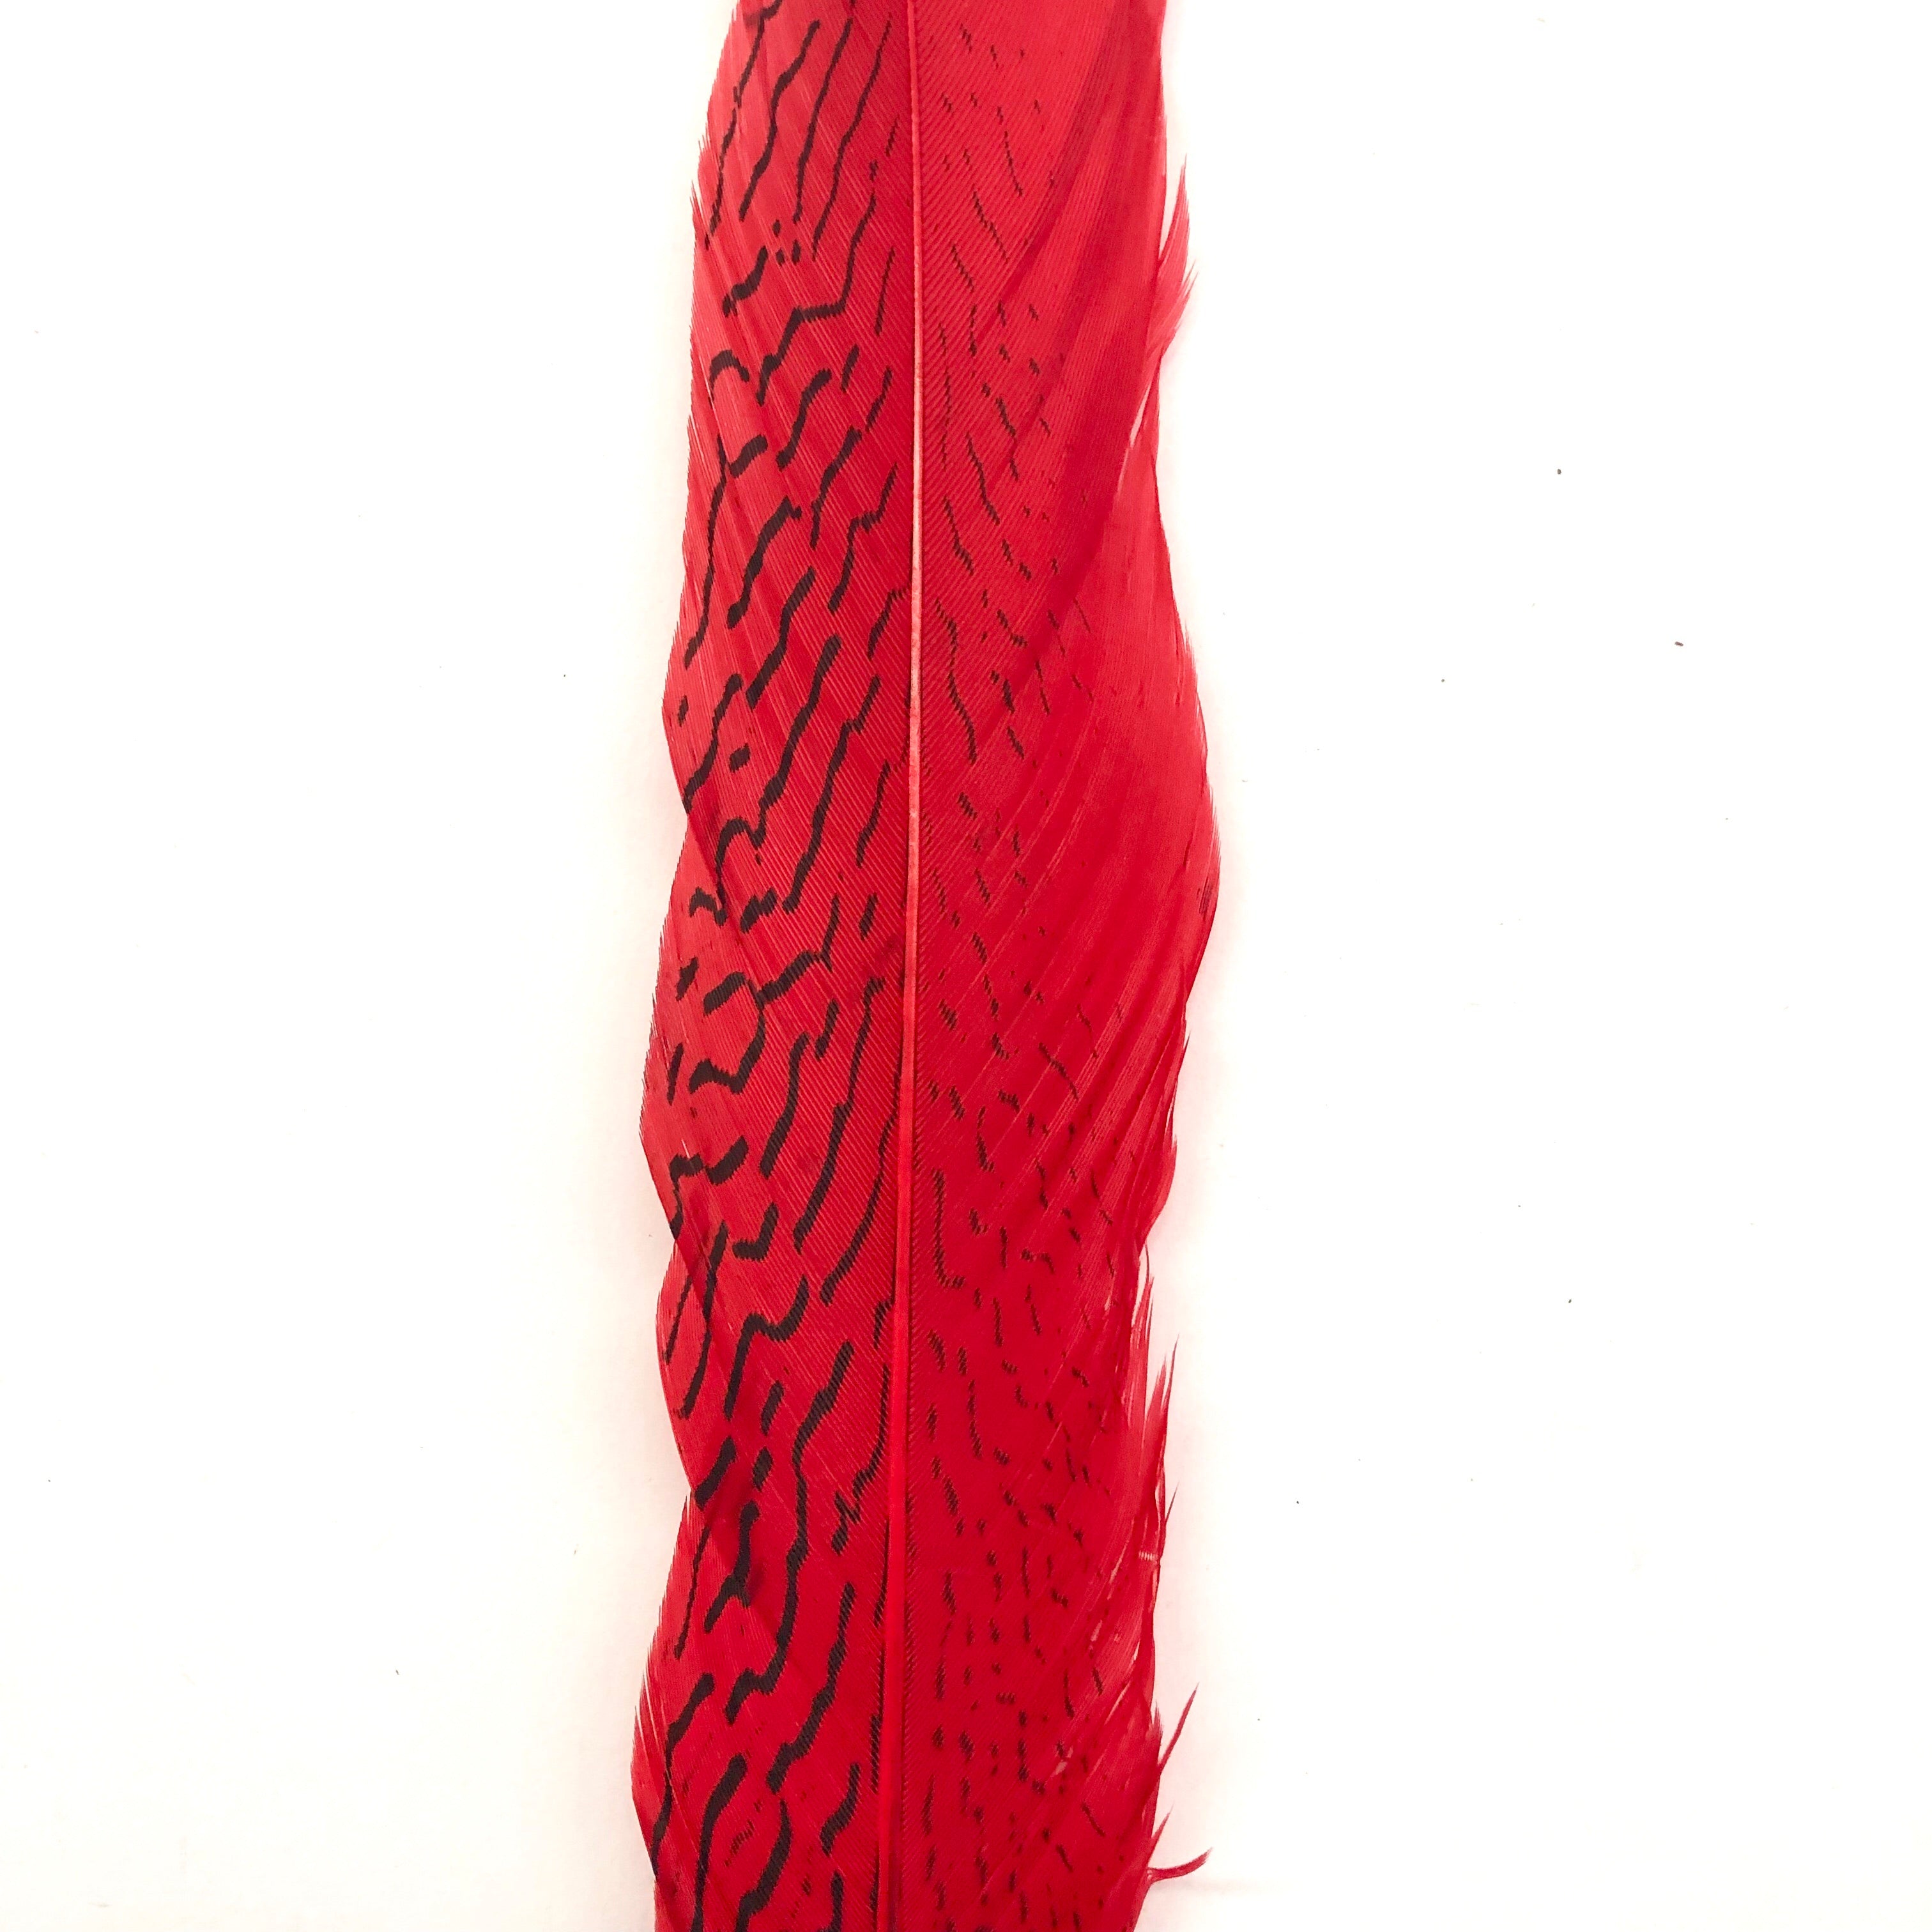 10" to 20" Silver Pheasant Tail Feather - Red